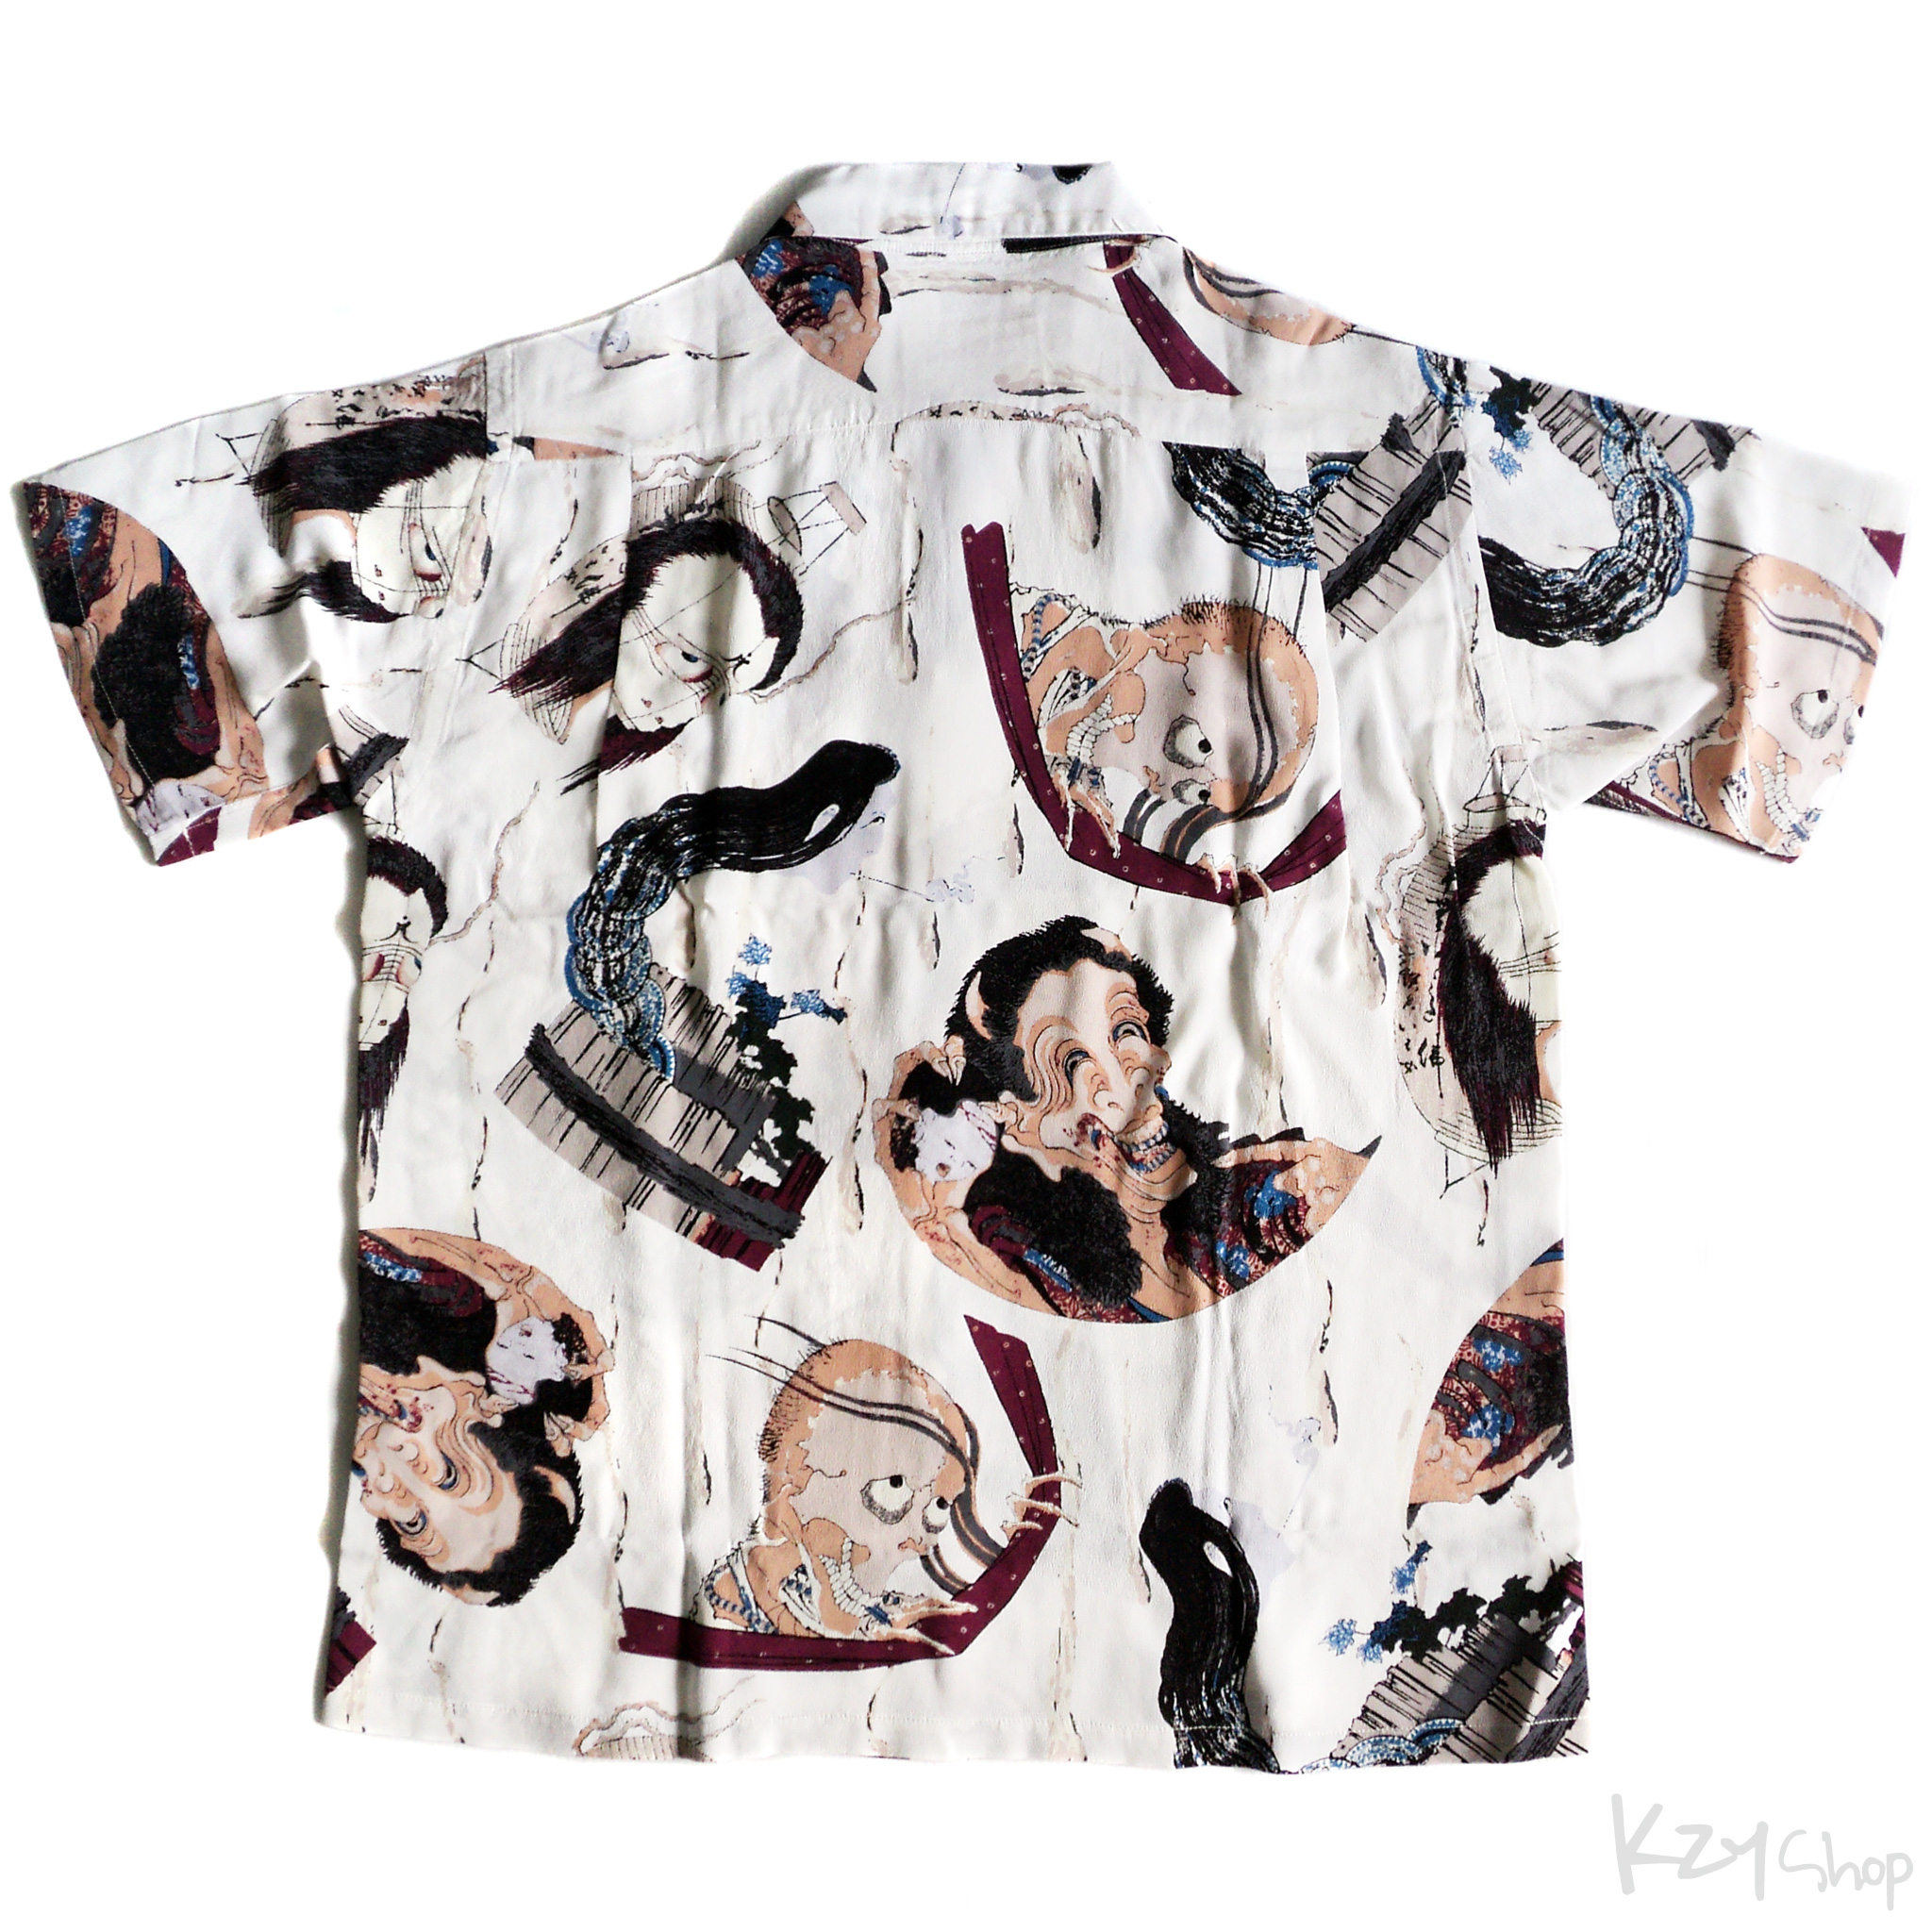 SUN SURF X HOKUSAI SPECIAL EDITION "Round of Ghost Stories at Night" (2017) off white